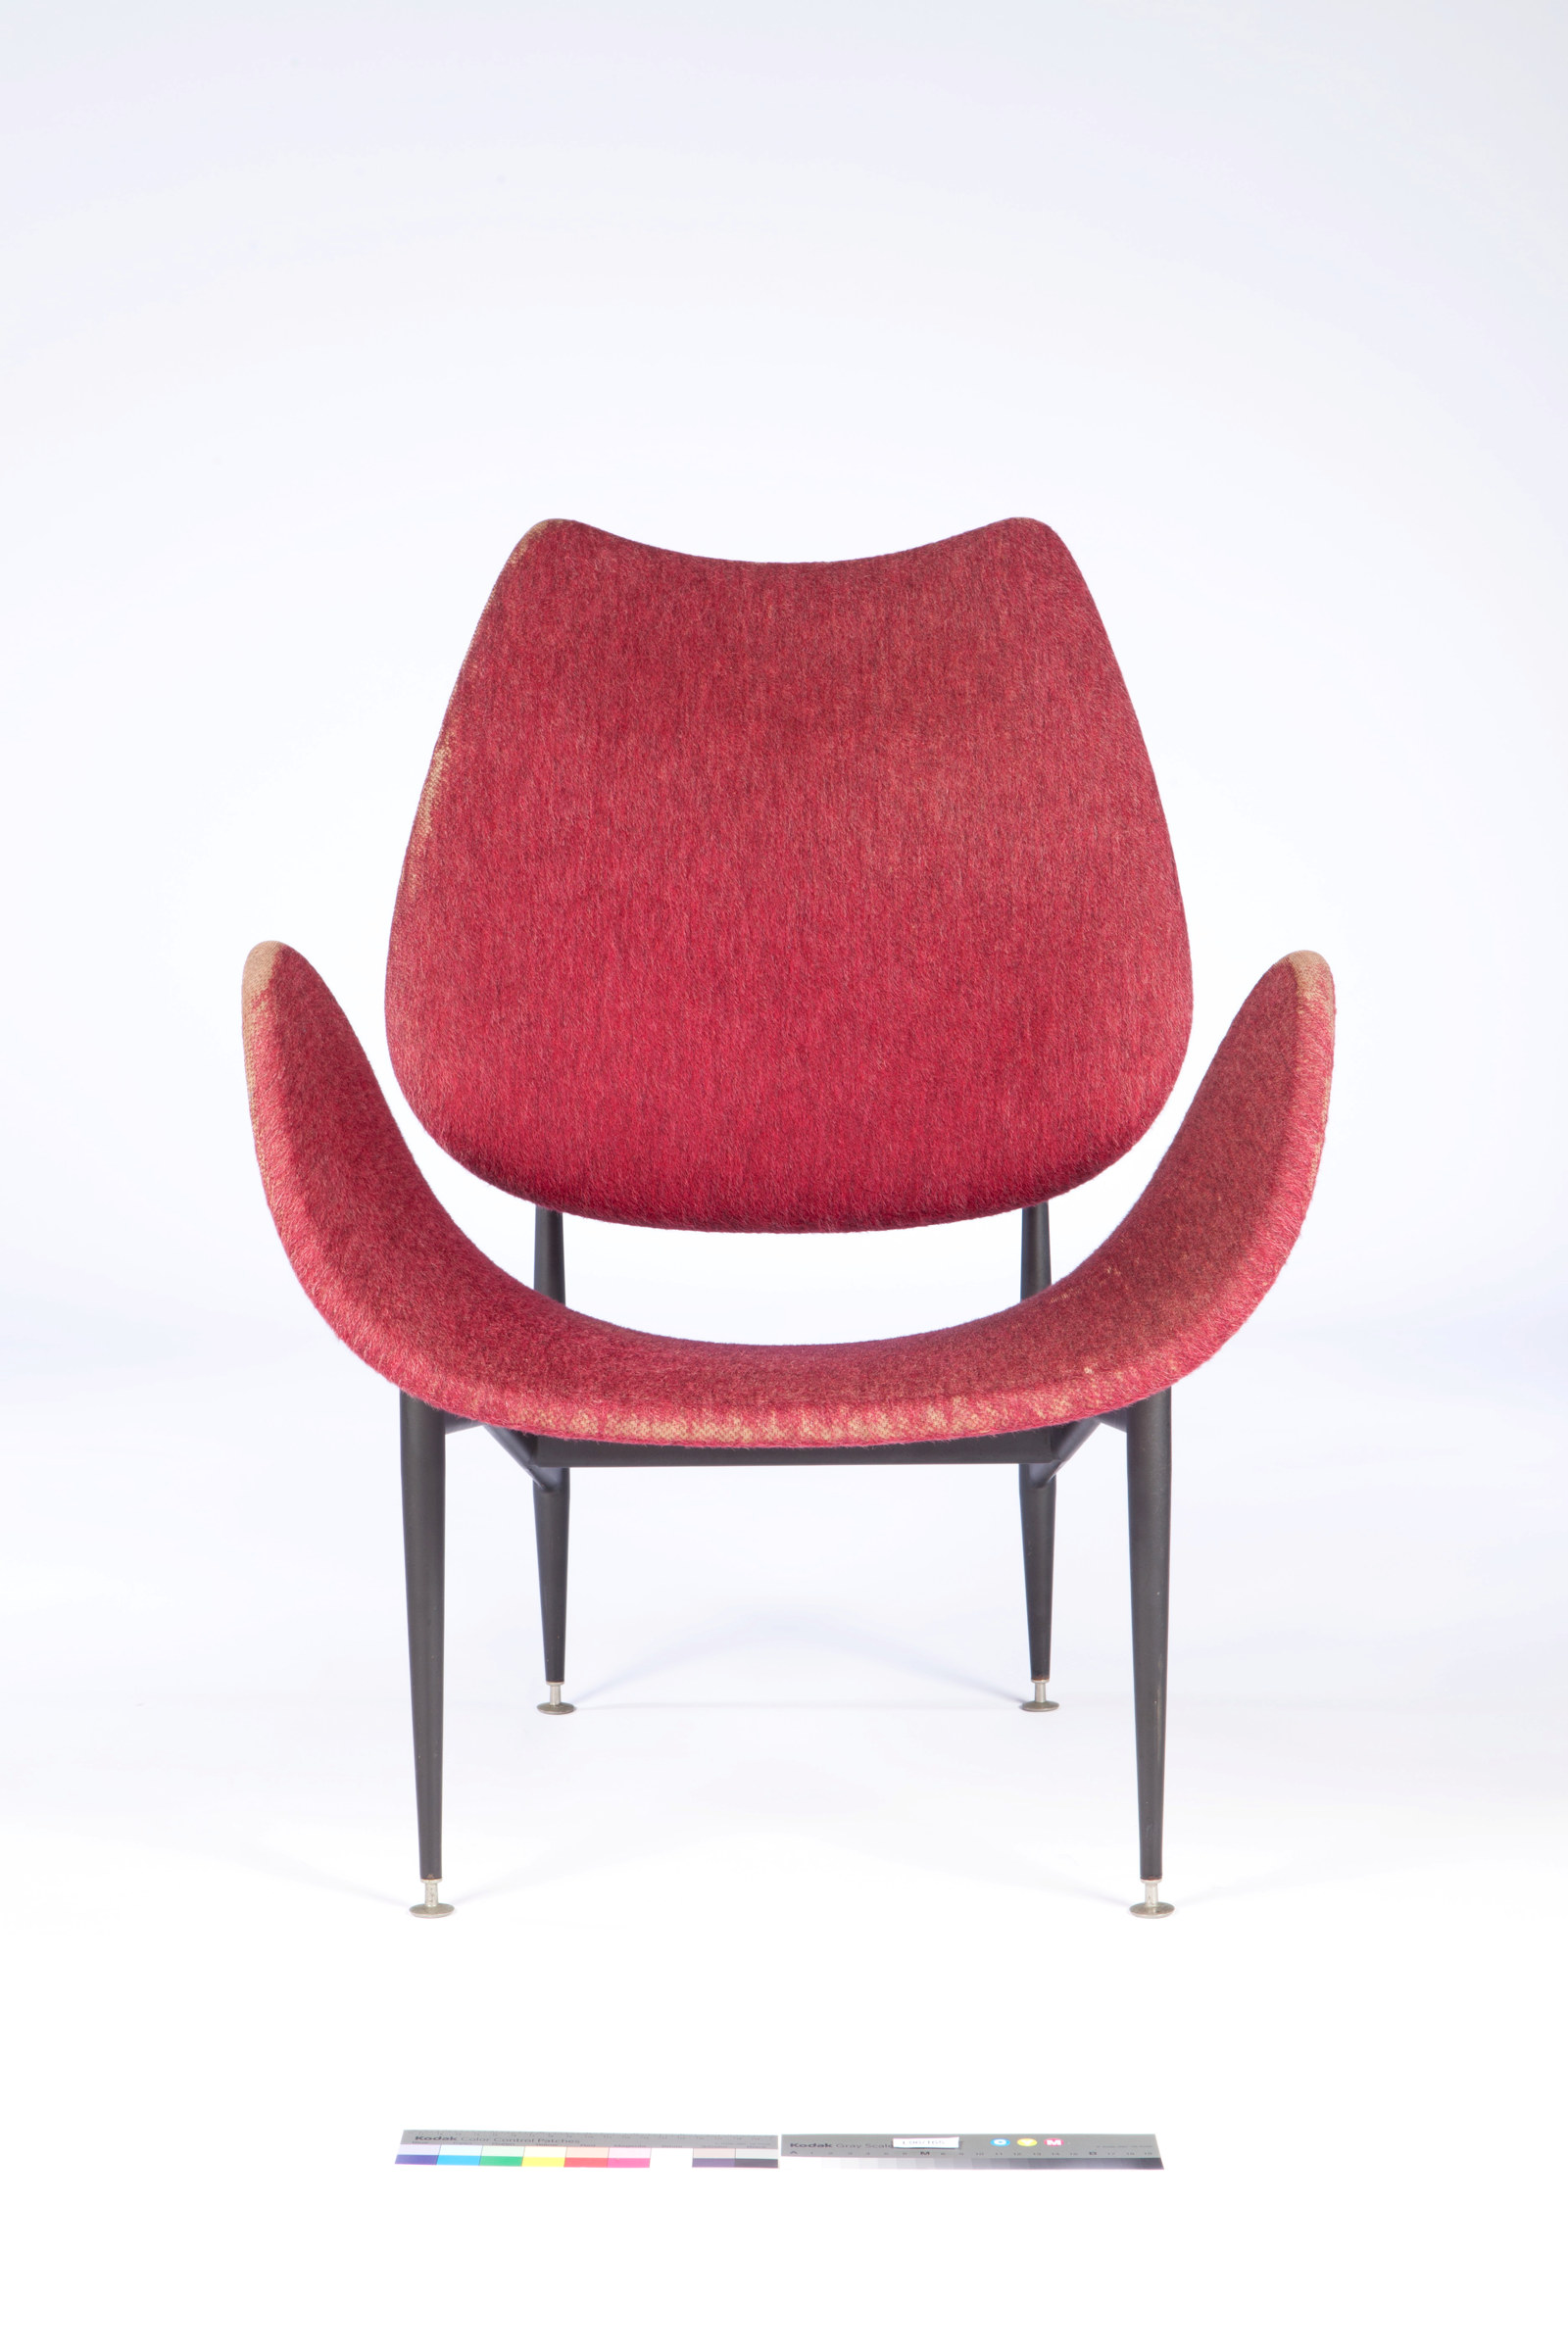 'Scape' chair, designed by Grant Featherston for Aristoc Industries, Melbourne, Australia, 1961